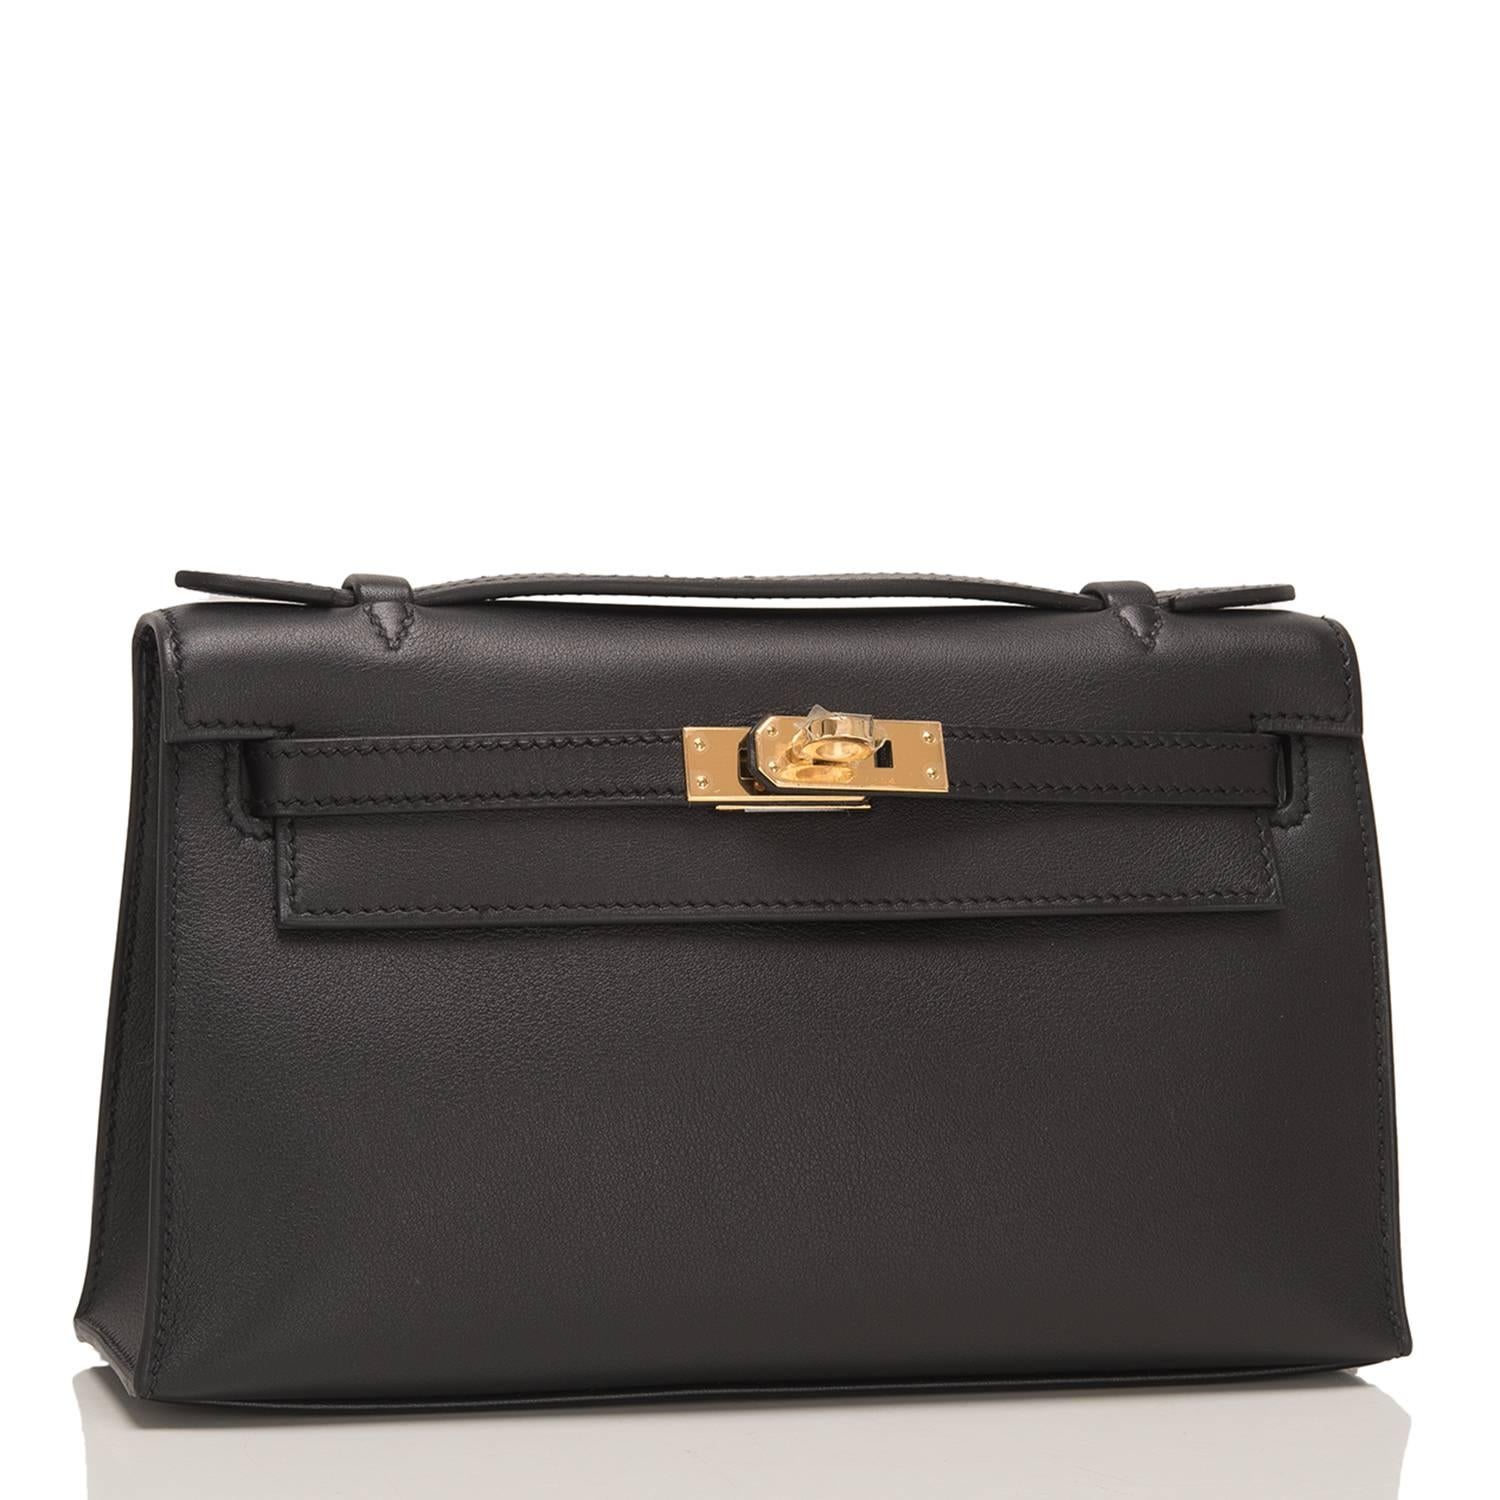 Hermes Black Mini Kelly Pochette of swift leather with gold hardware.

This Hermes pochette has tonal stitching, a front flap with two straps, a toggle closure and a single flat handle.

The interior is lined with black chevre and has one wall